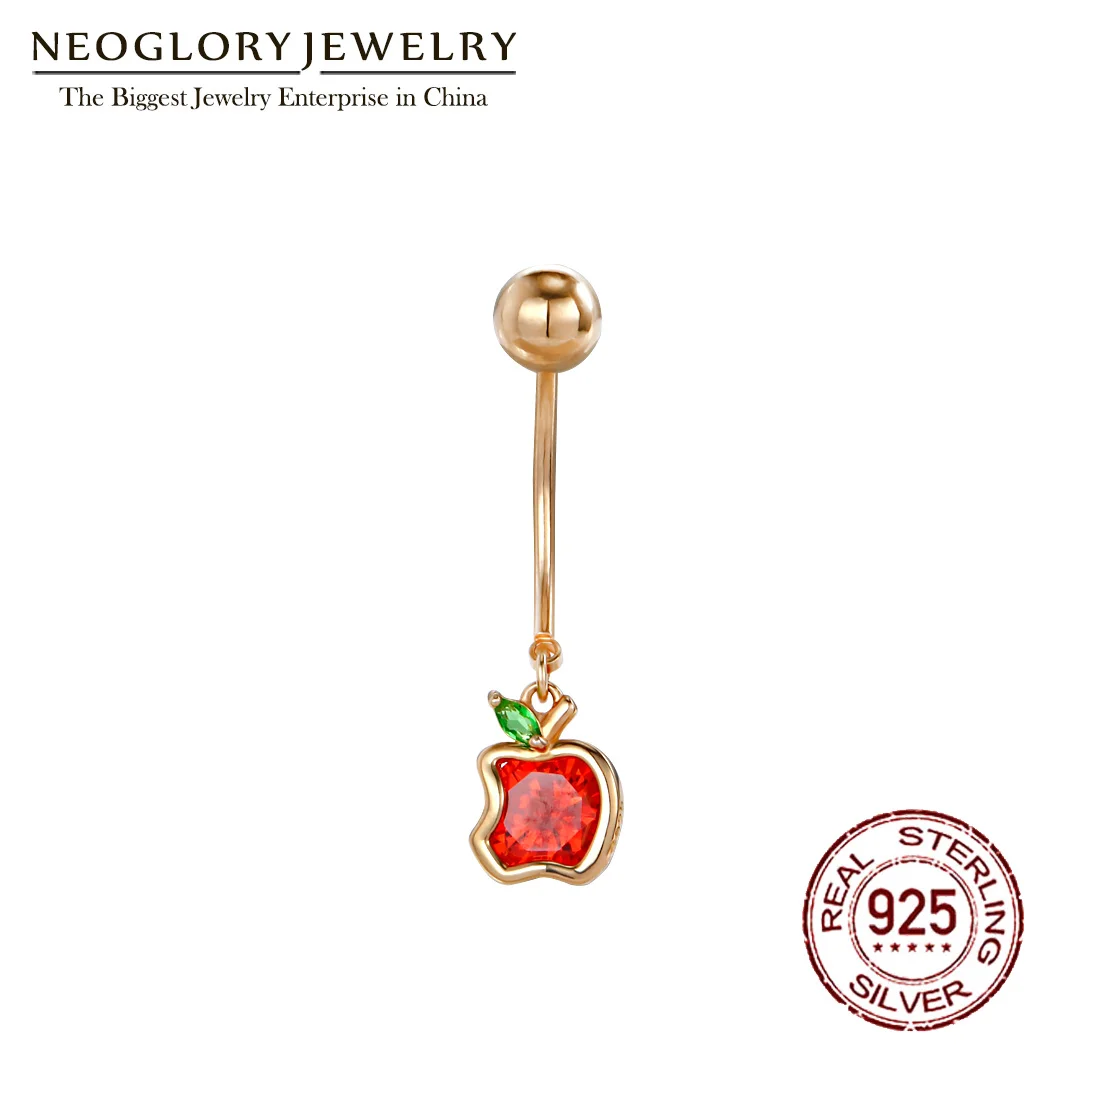 

Neoglory S925 Zircon Red Apple Belly Button Ring For Women Body Piercing Gold Color Shining Cute Navel Jewelry 2021 New Hot Gift